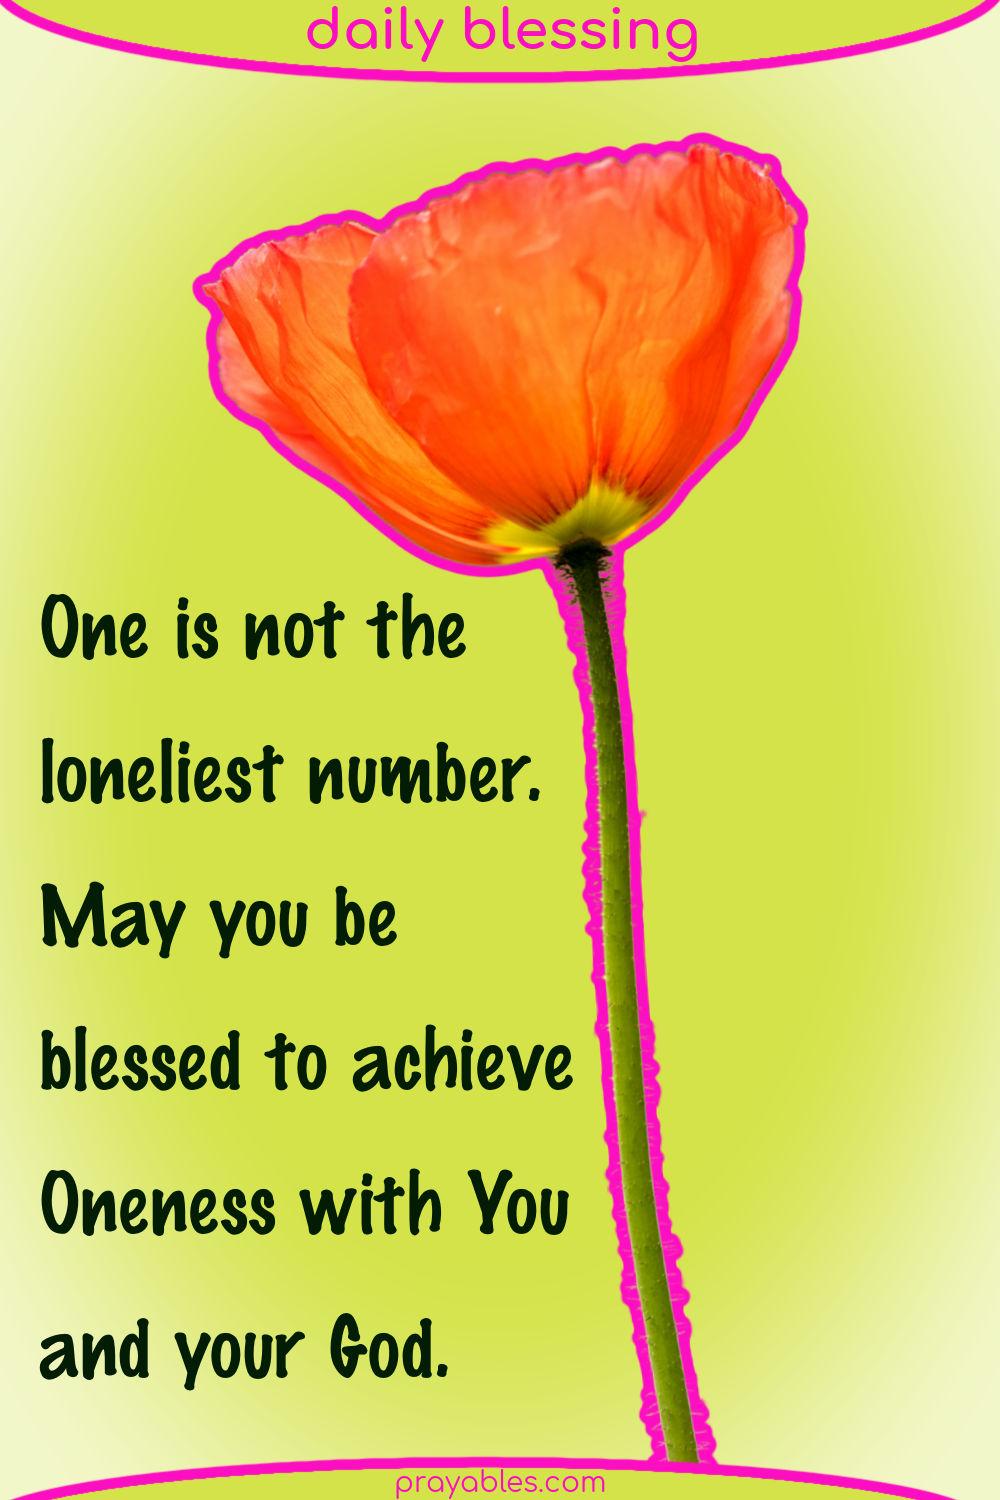 One is not the loneliest number. May you be blessed to achieve Oneness with You and your God.